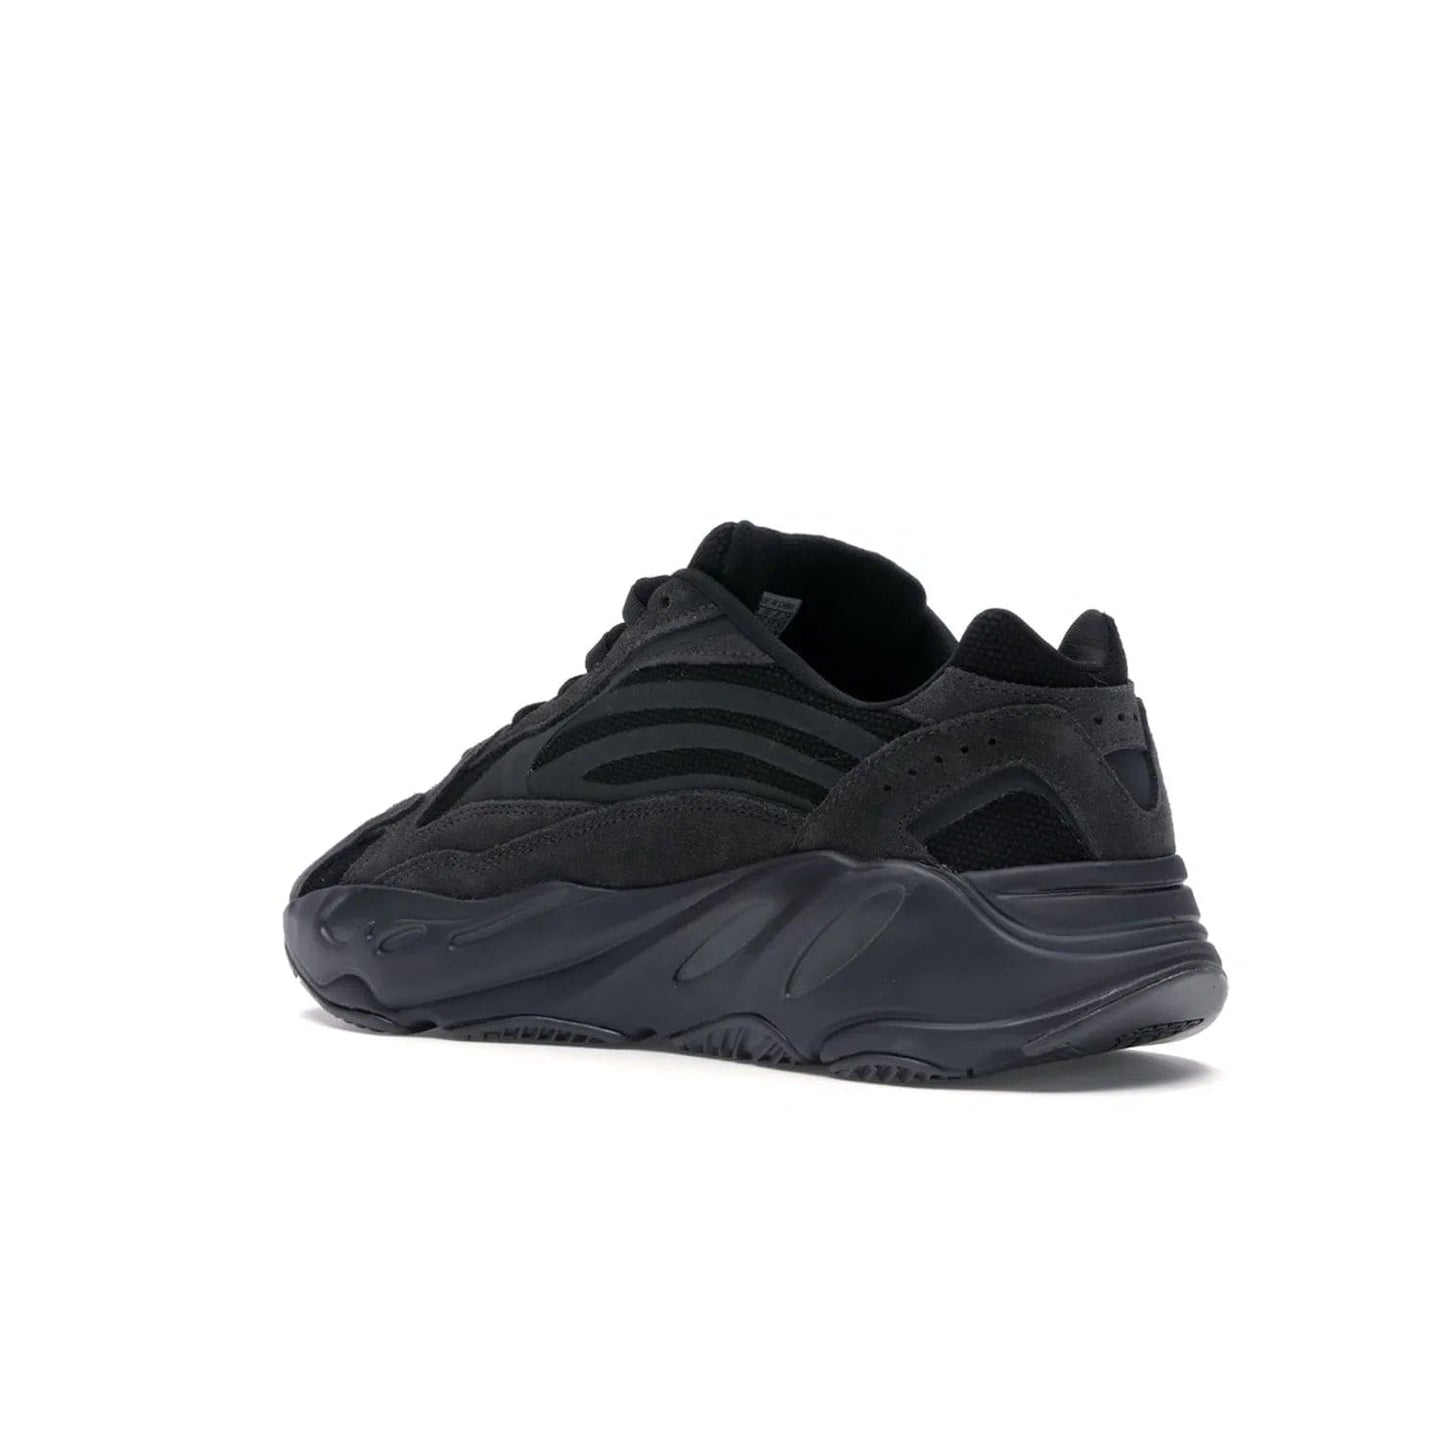 adidas Yeezy Boost 700 V2 Vanta - Image 23 - Only at www.BallersClubKickz.com - Introducing the adidas Yeezy Boost 700 V2 Vanta - a sleek and stylish all-black design featuring a combination of mesh, leather, and suede construction with signature Boost cushioning in the sole. The ultimate in comfort and support.